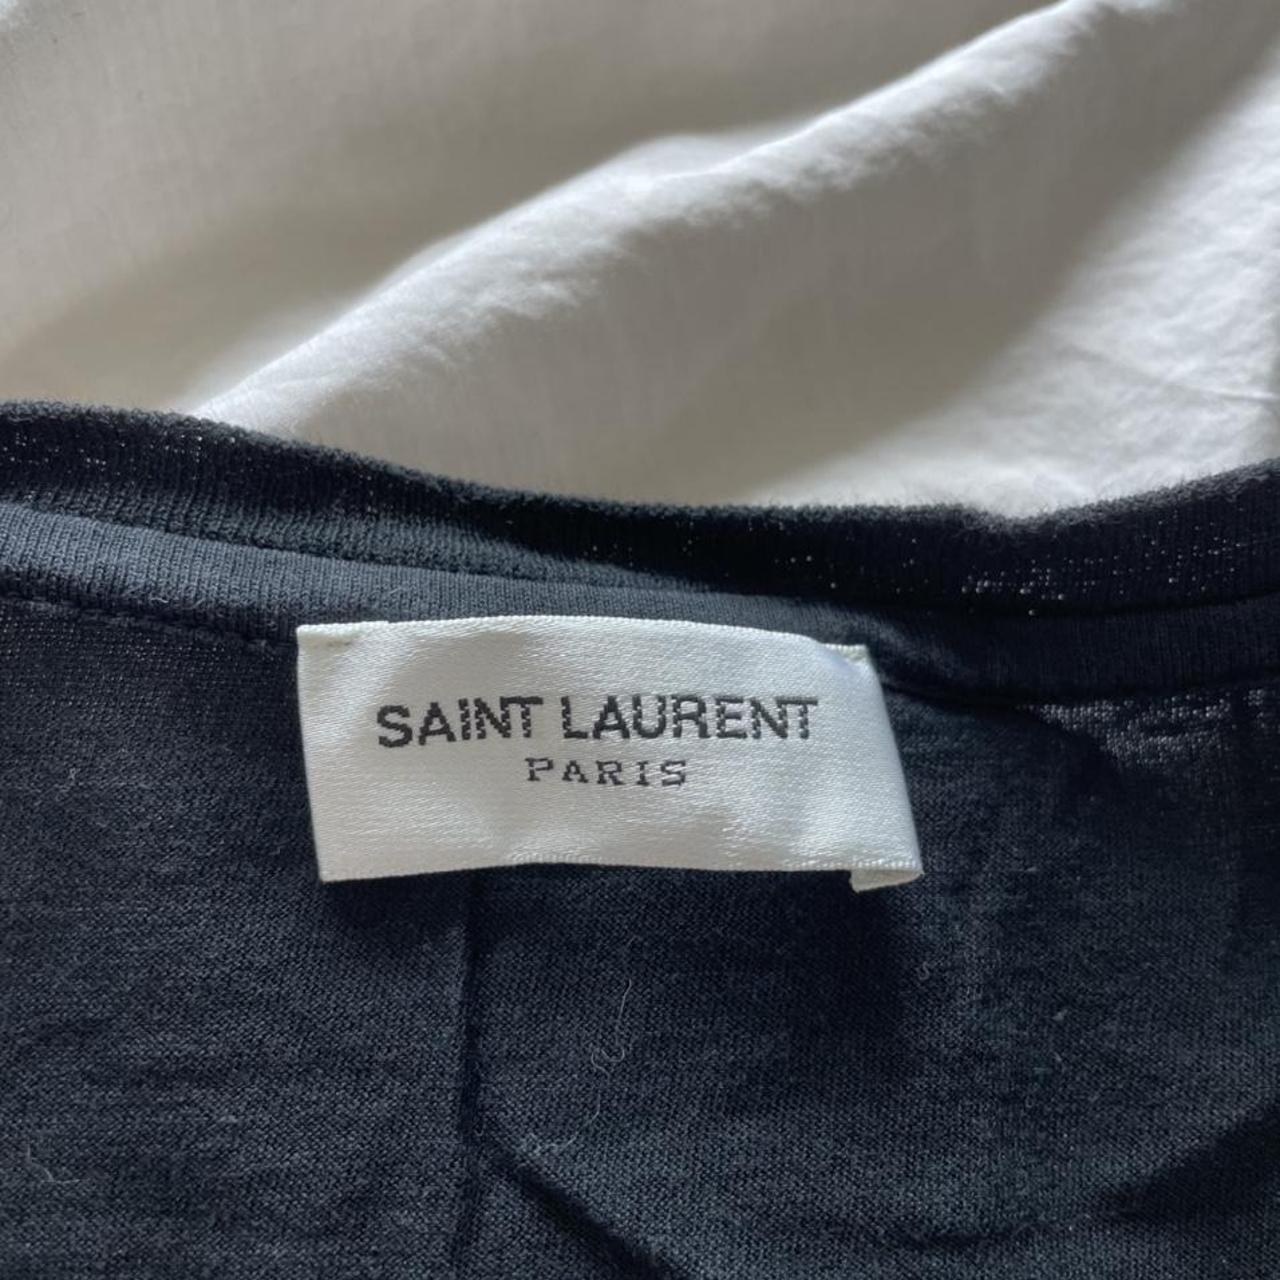 YSL tee, sold out and discontinued Blood Luster